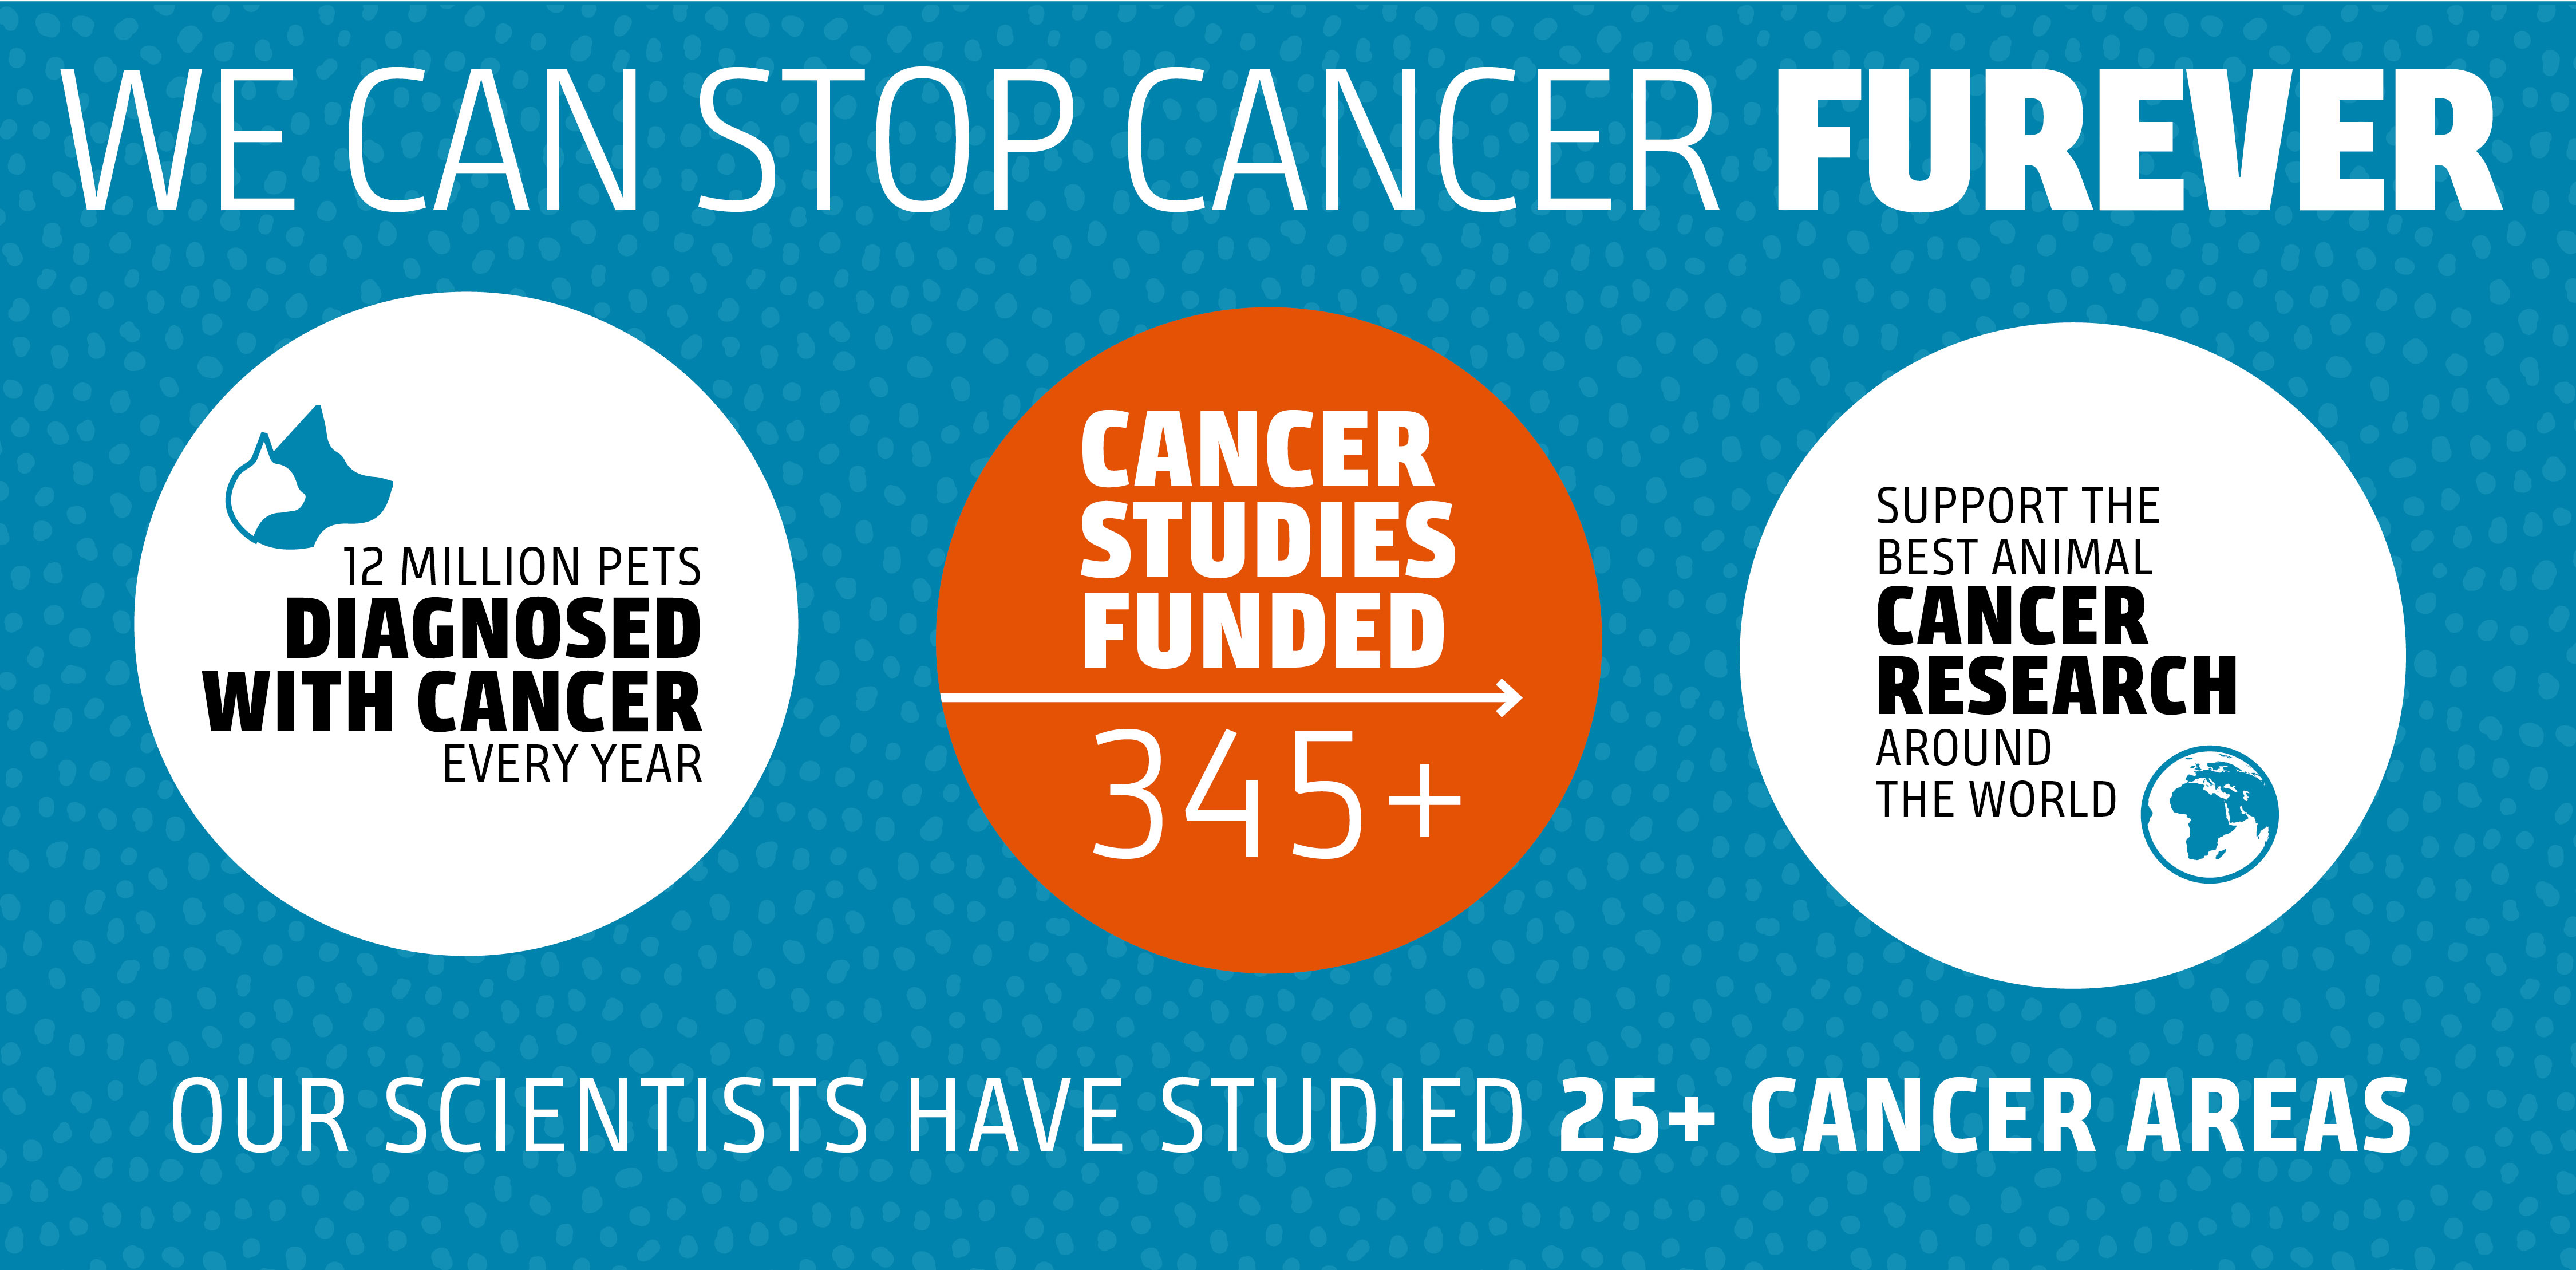 Support the Best Animal Resarch Around the World. We have funded over 345+ cancer studies, but there's still more to do. With your help, we can Stop Cancer Furever!